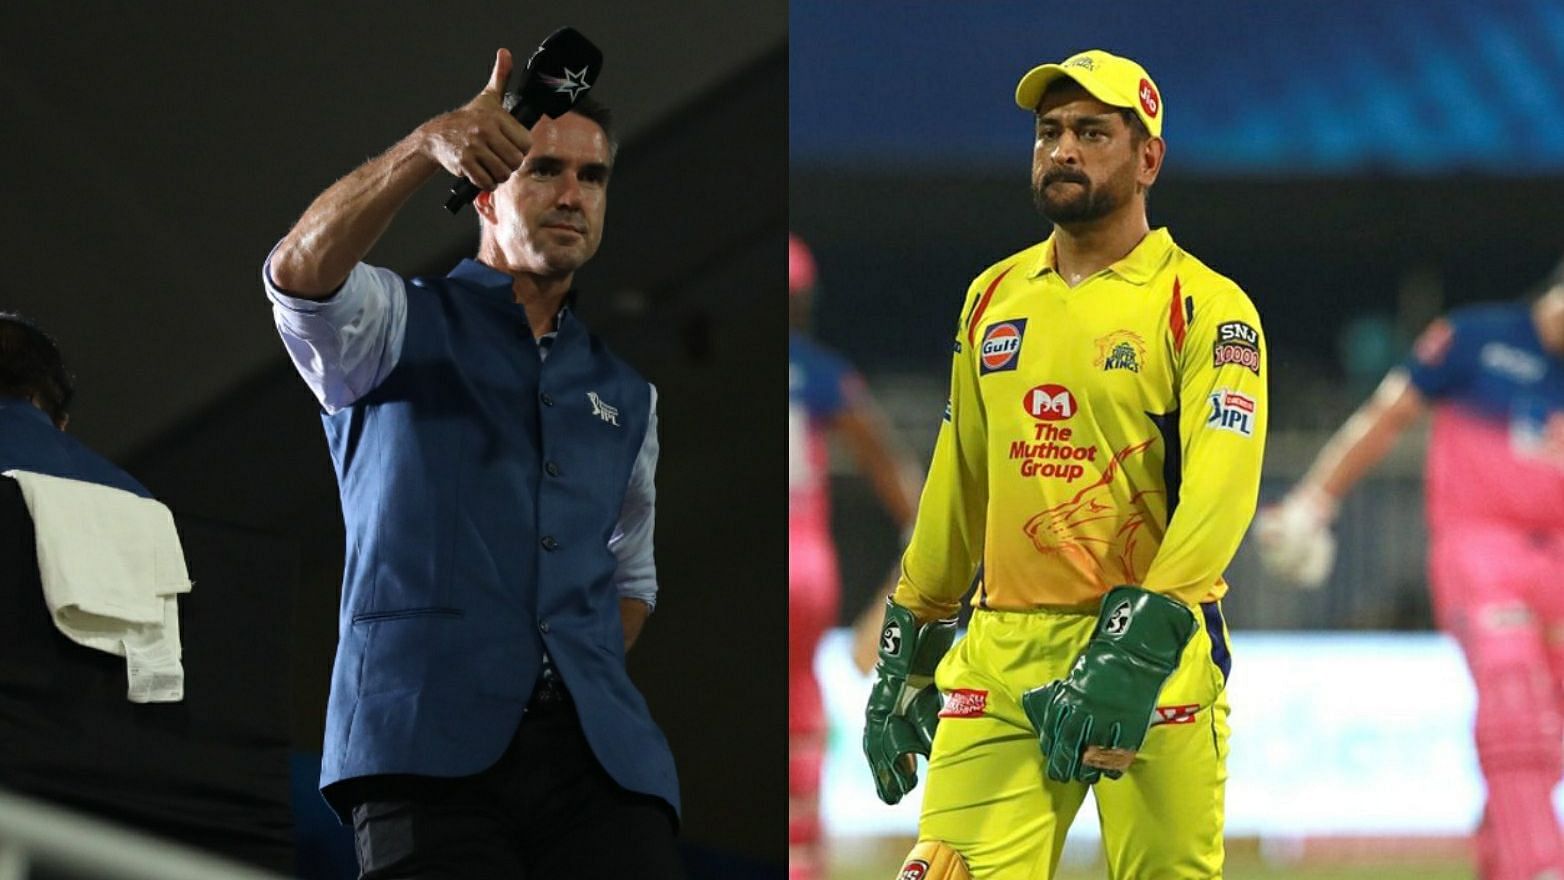 Kevin Pietersen was harsh on MS Dhoni after the latter gave his reasons for coming in at No. 7 to bat against Rajasthan Royals